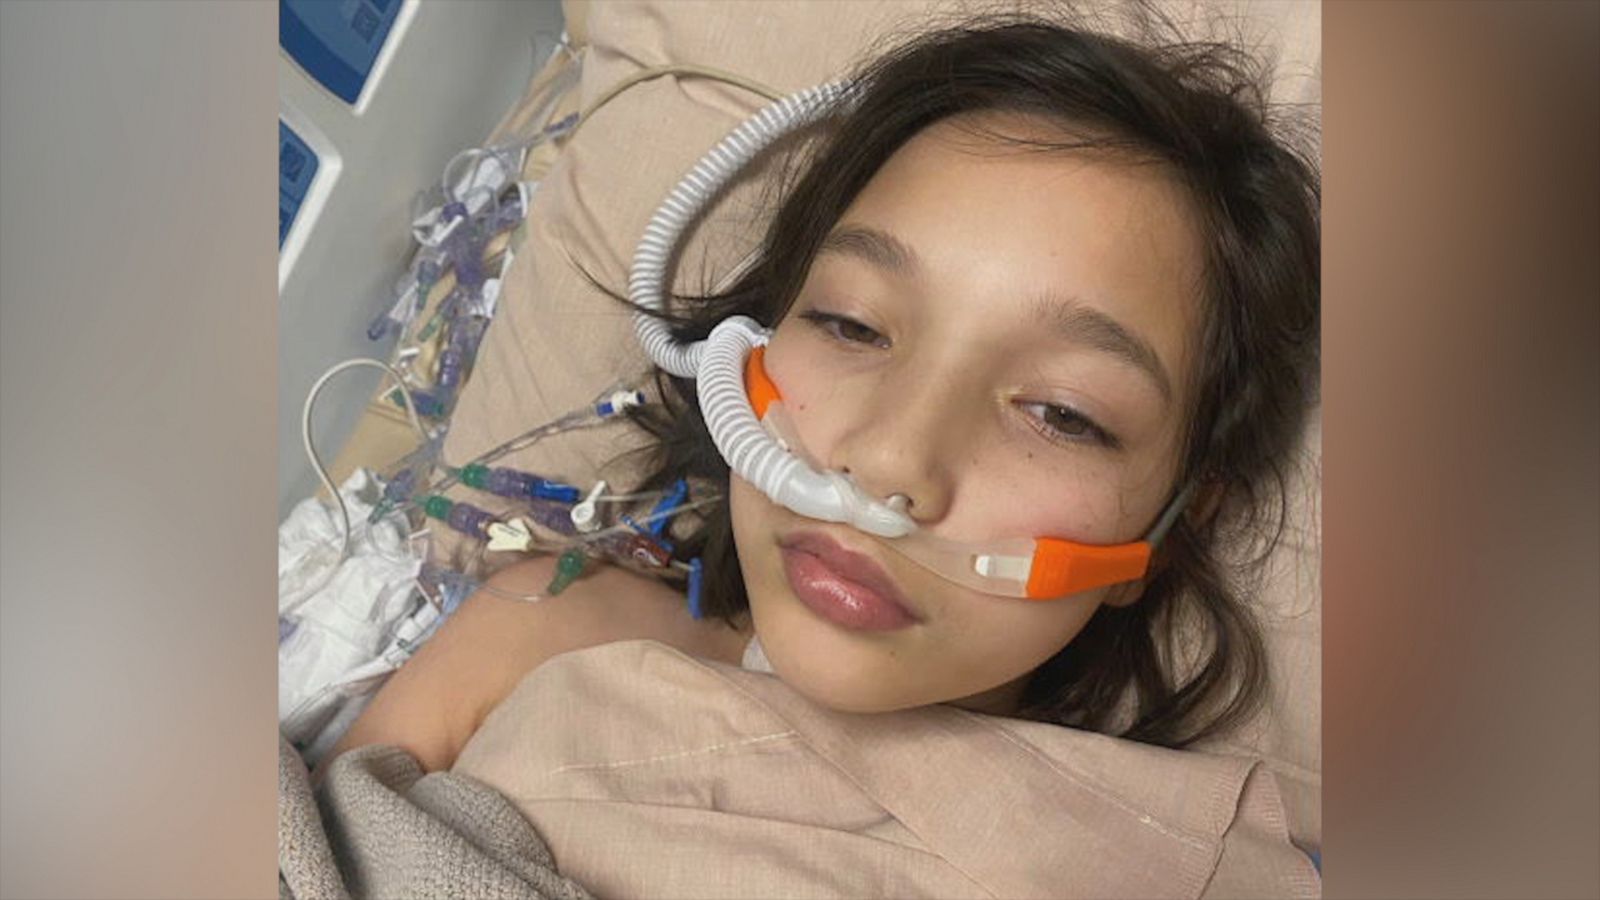 VIDEO: 'I died for two minutes:' Girl who beat a COVID-19 related illness recalls experience